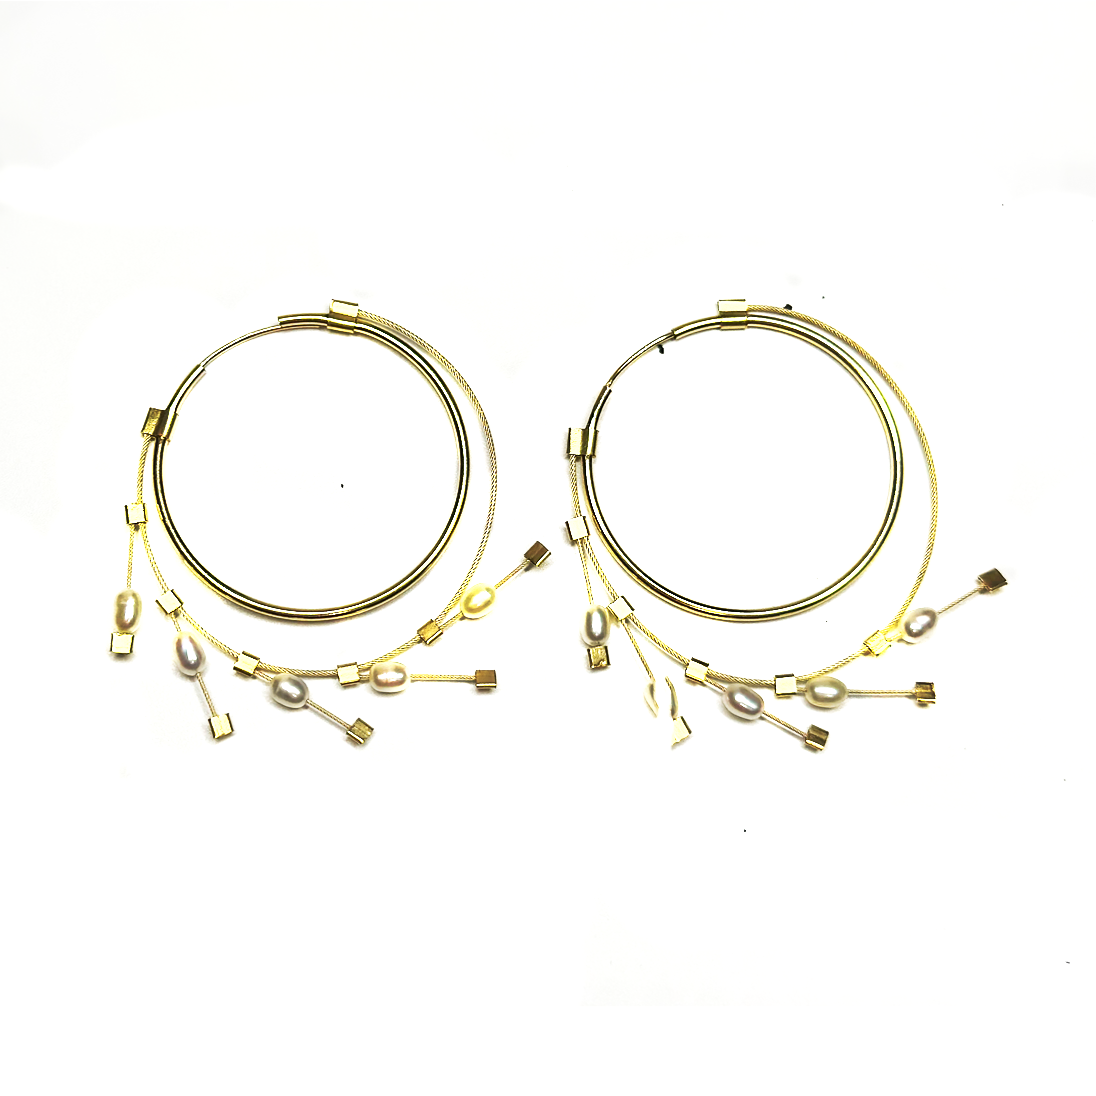 Gold wire earrings with pearls that look like a continual hoop through your ear.